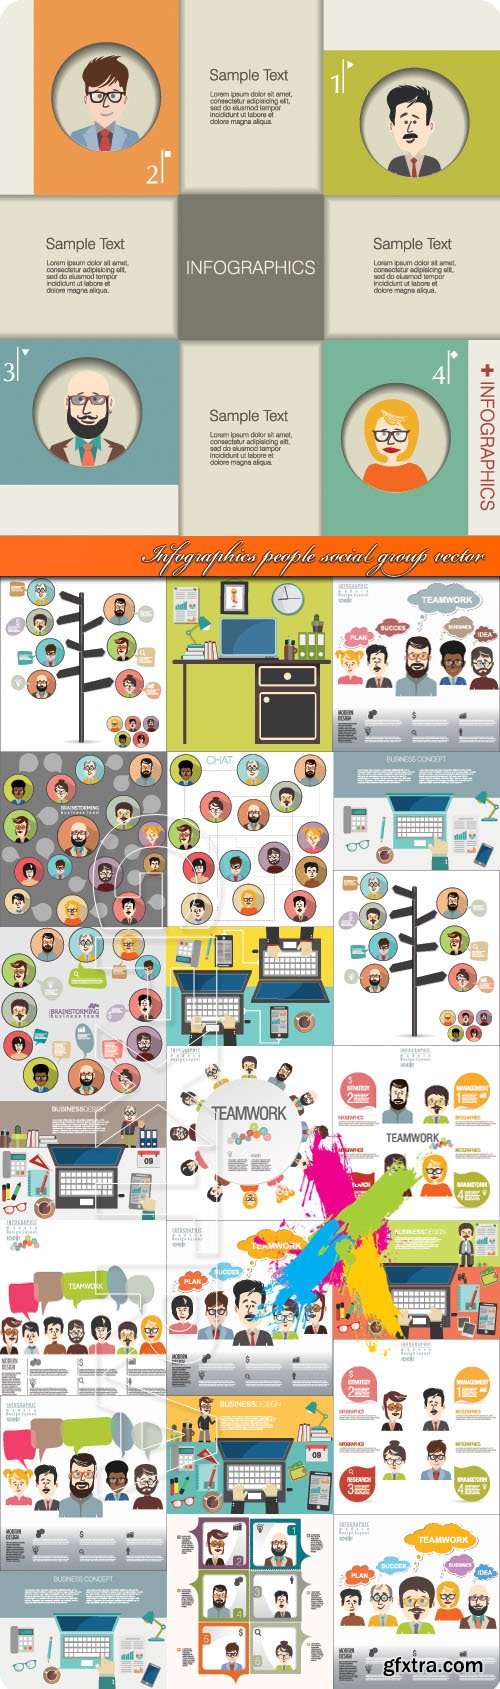 Infographics people social group vector